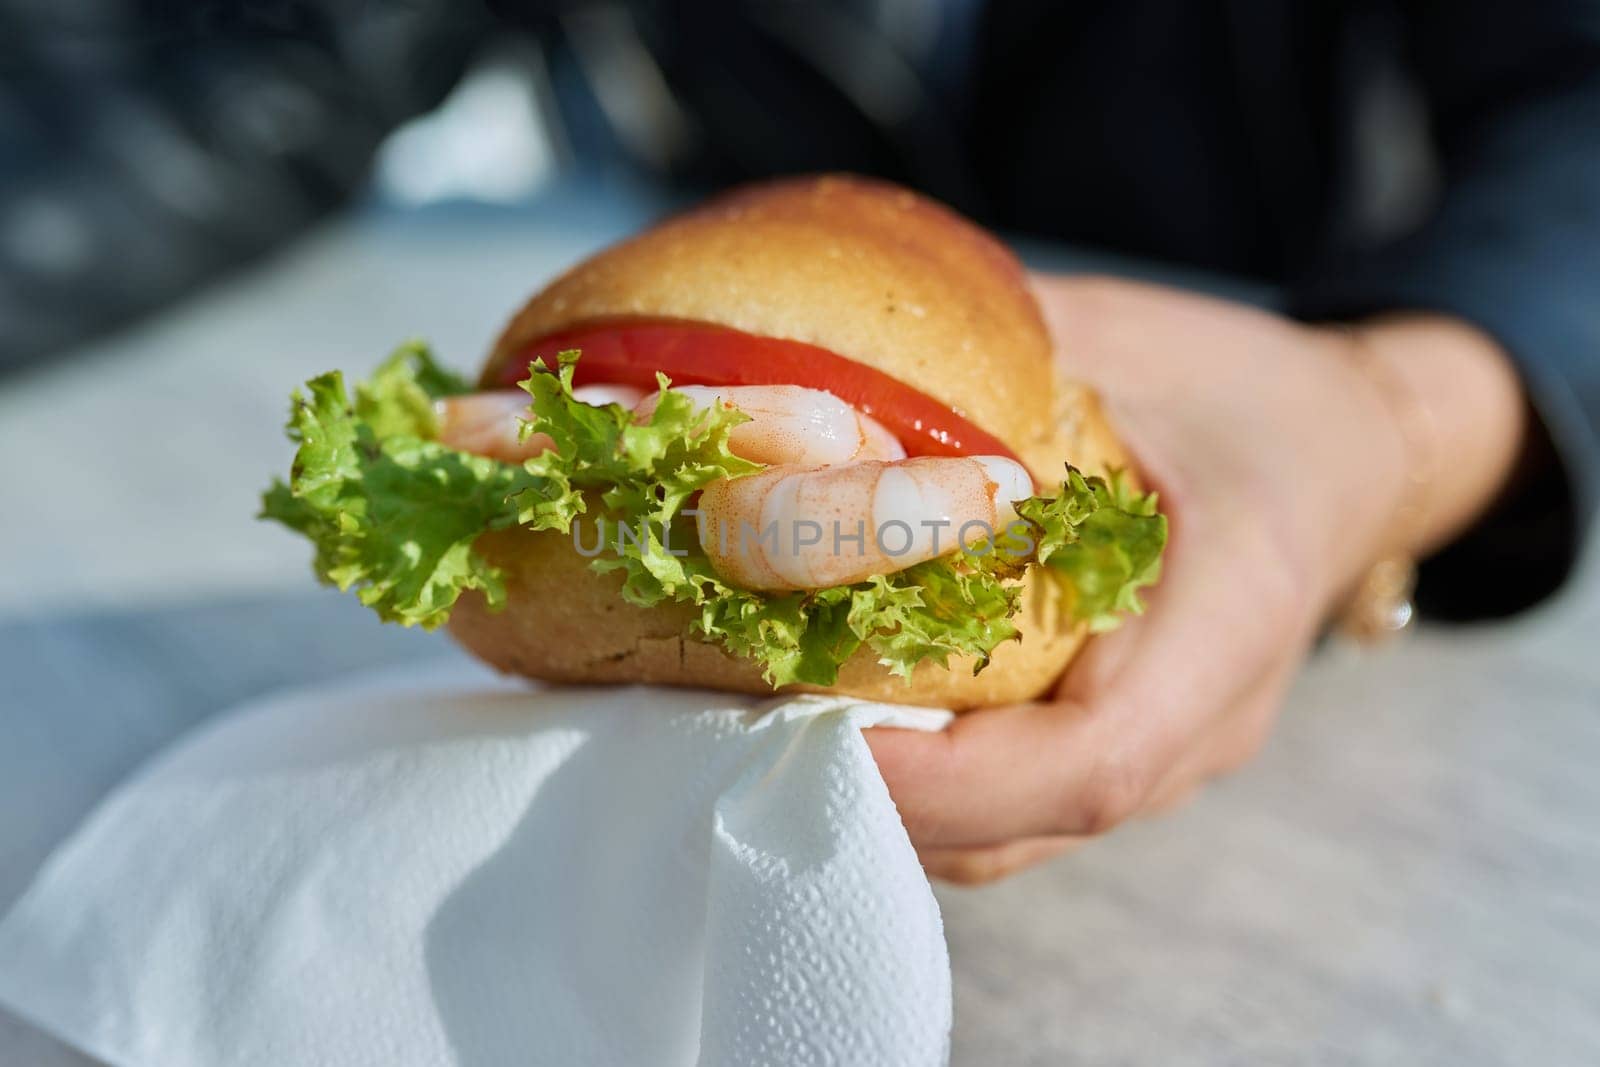 Traditional street sea food, shrimp burger, close-up in outdoor hands.